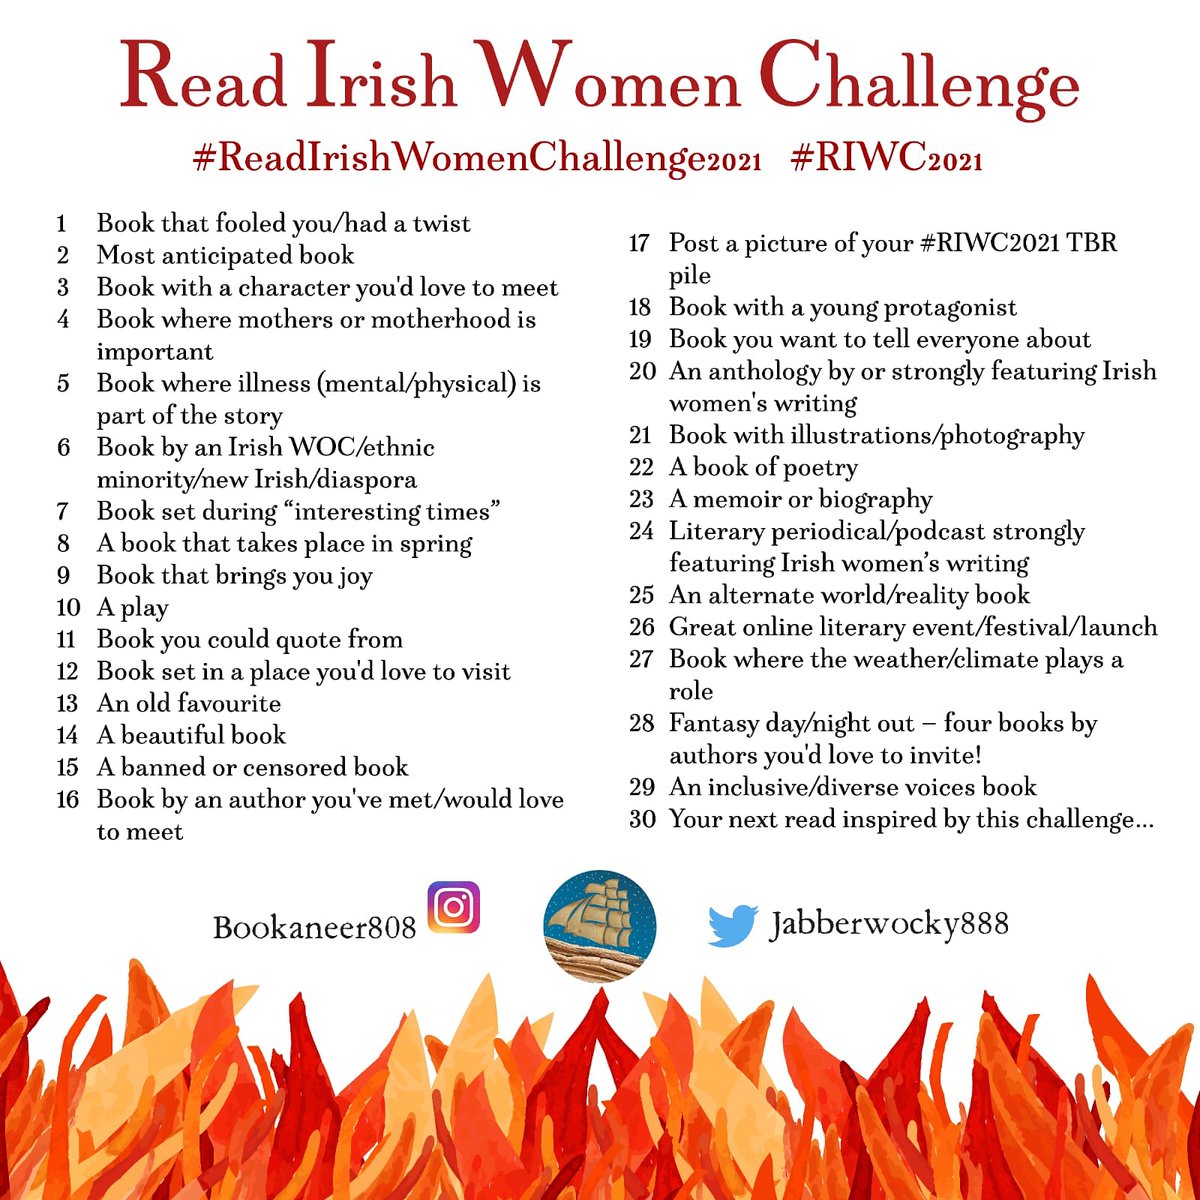 Day 30 of the  #ReadIrishWomenChallenge2021: your next read inspired by this challengeI have... So much to catch up on